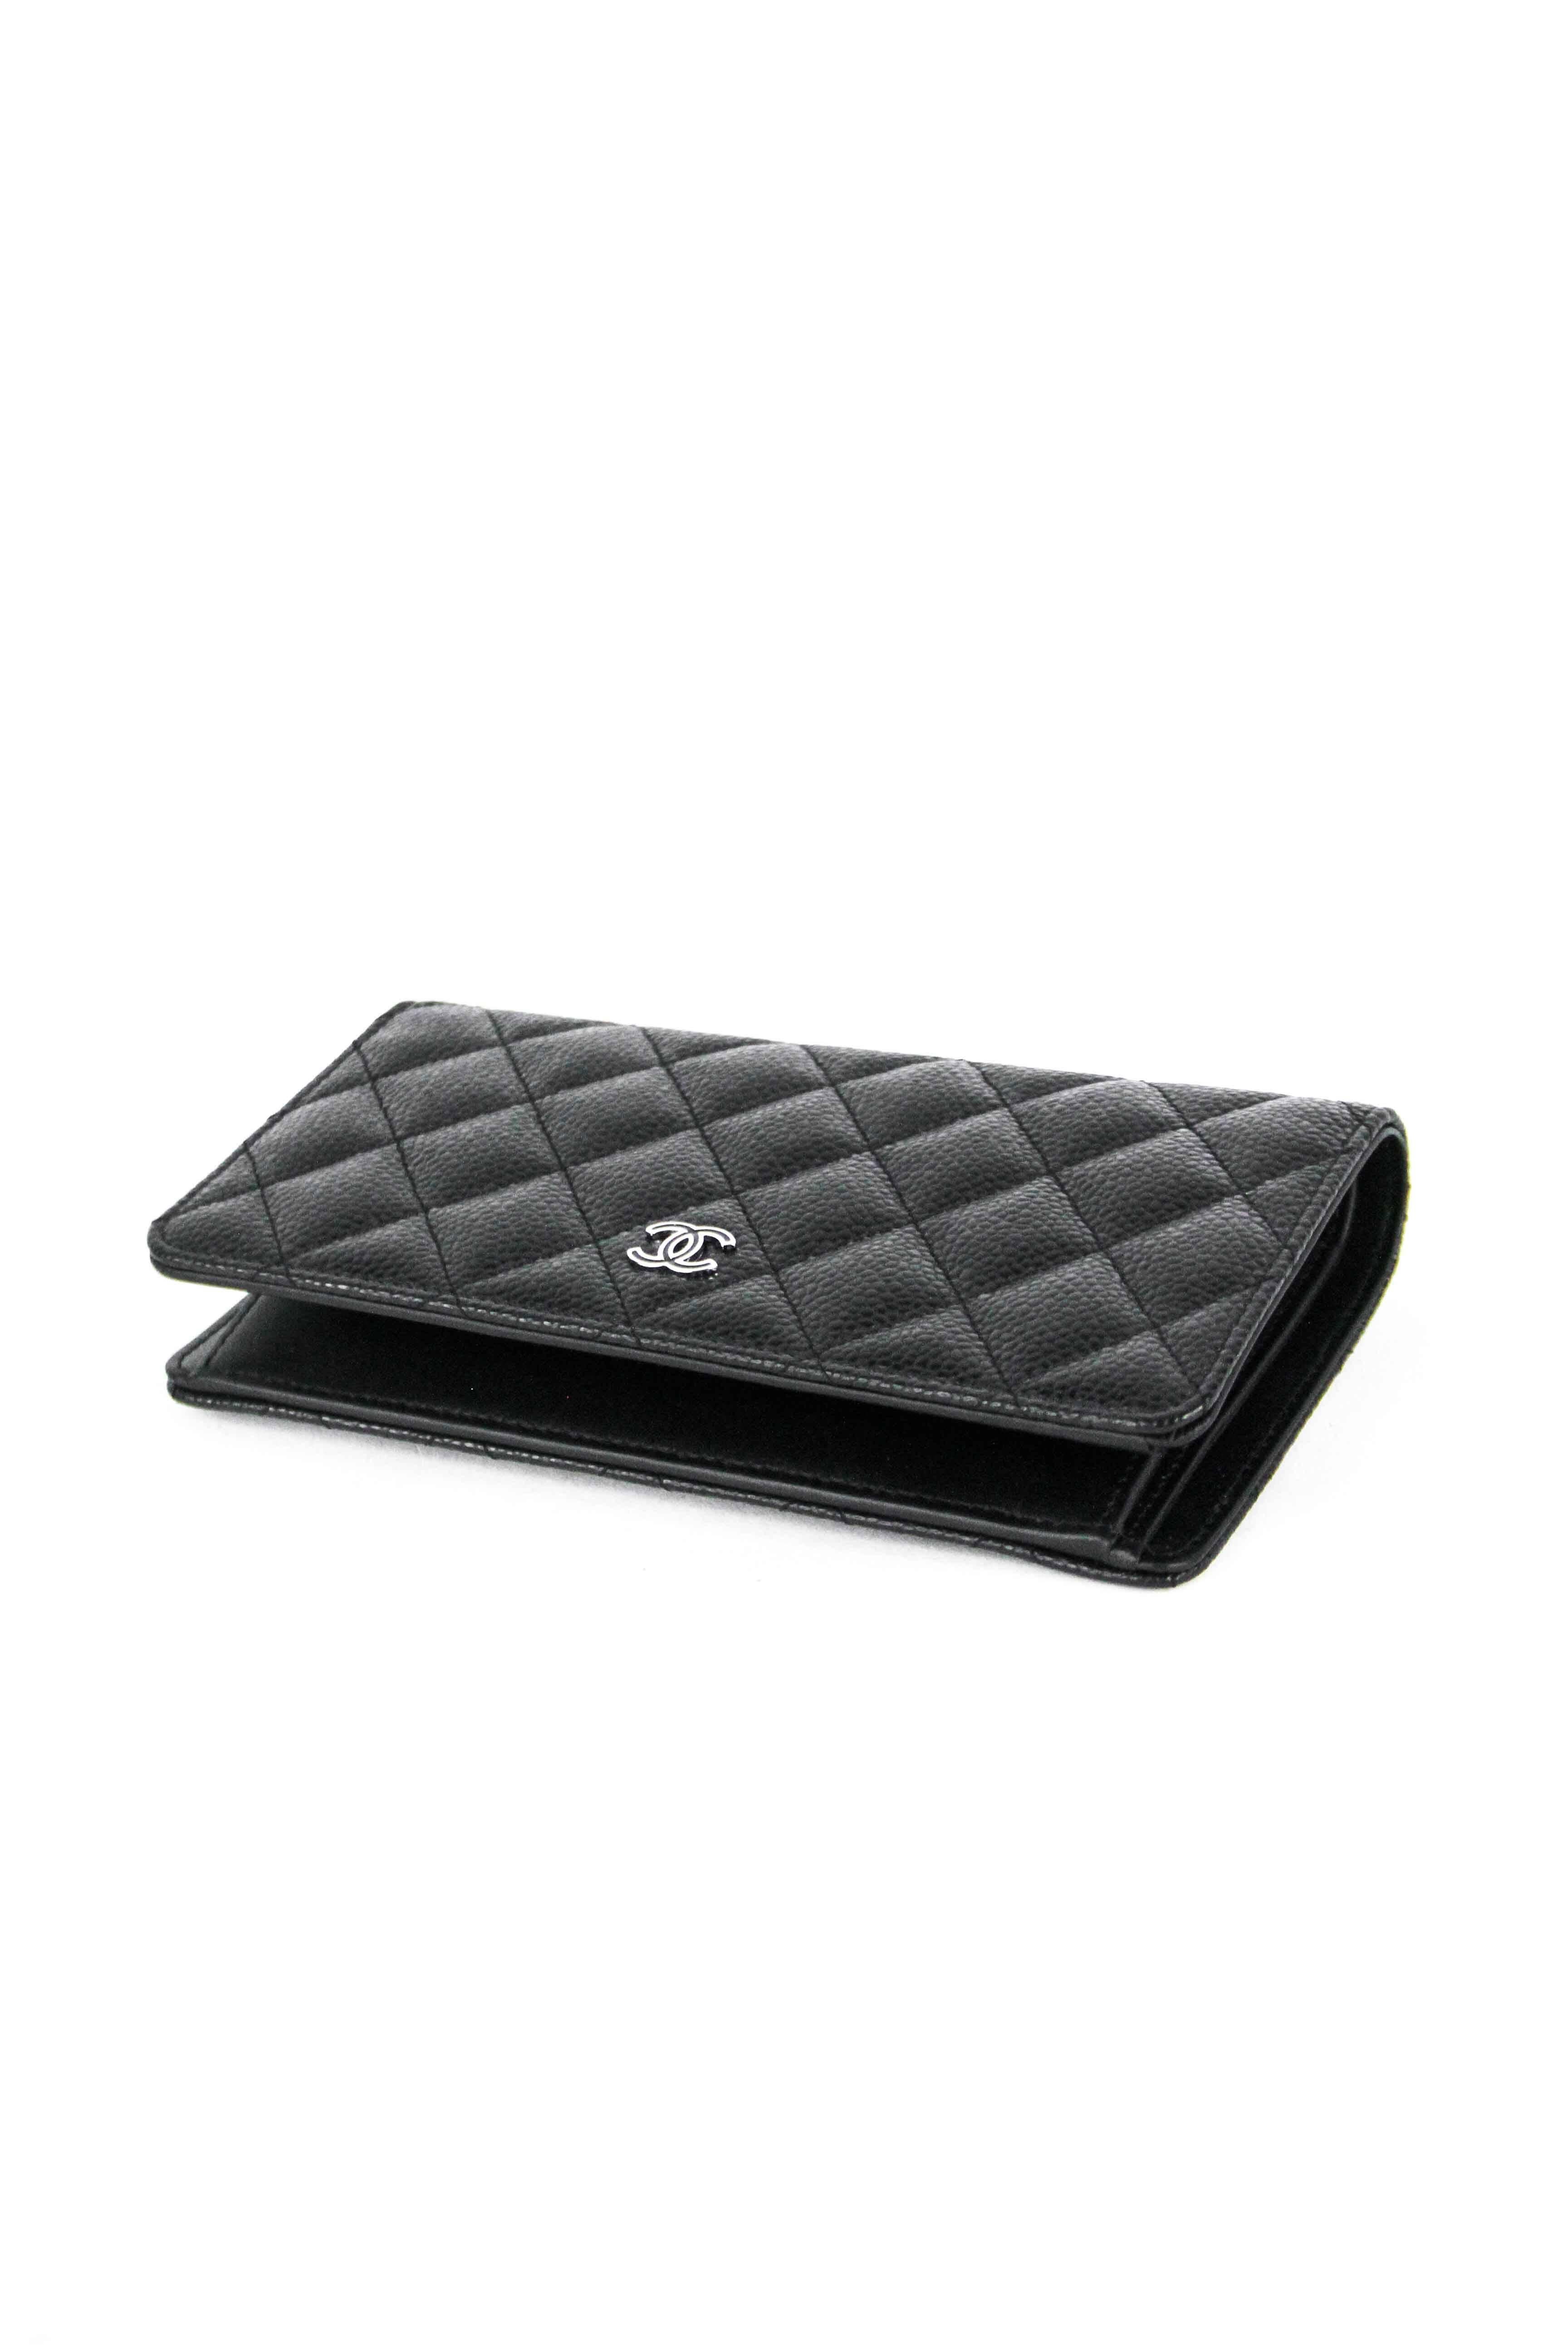 Chanel Quilted Caviar Long CC Wallet  5